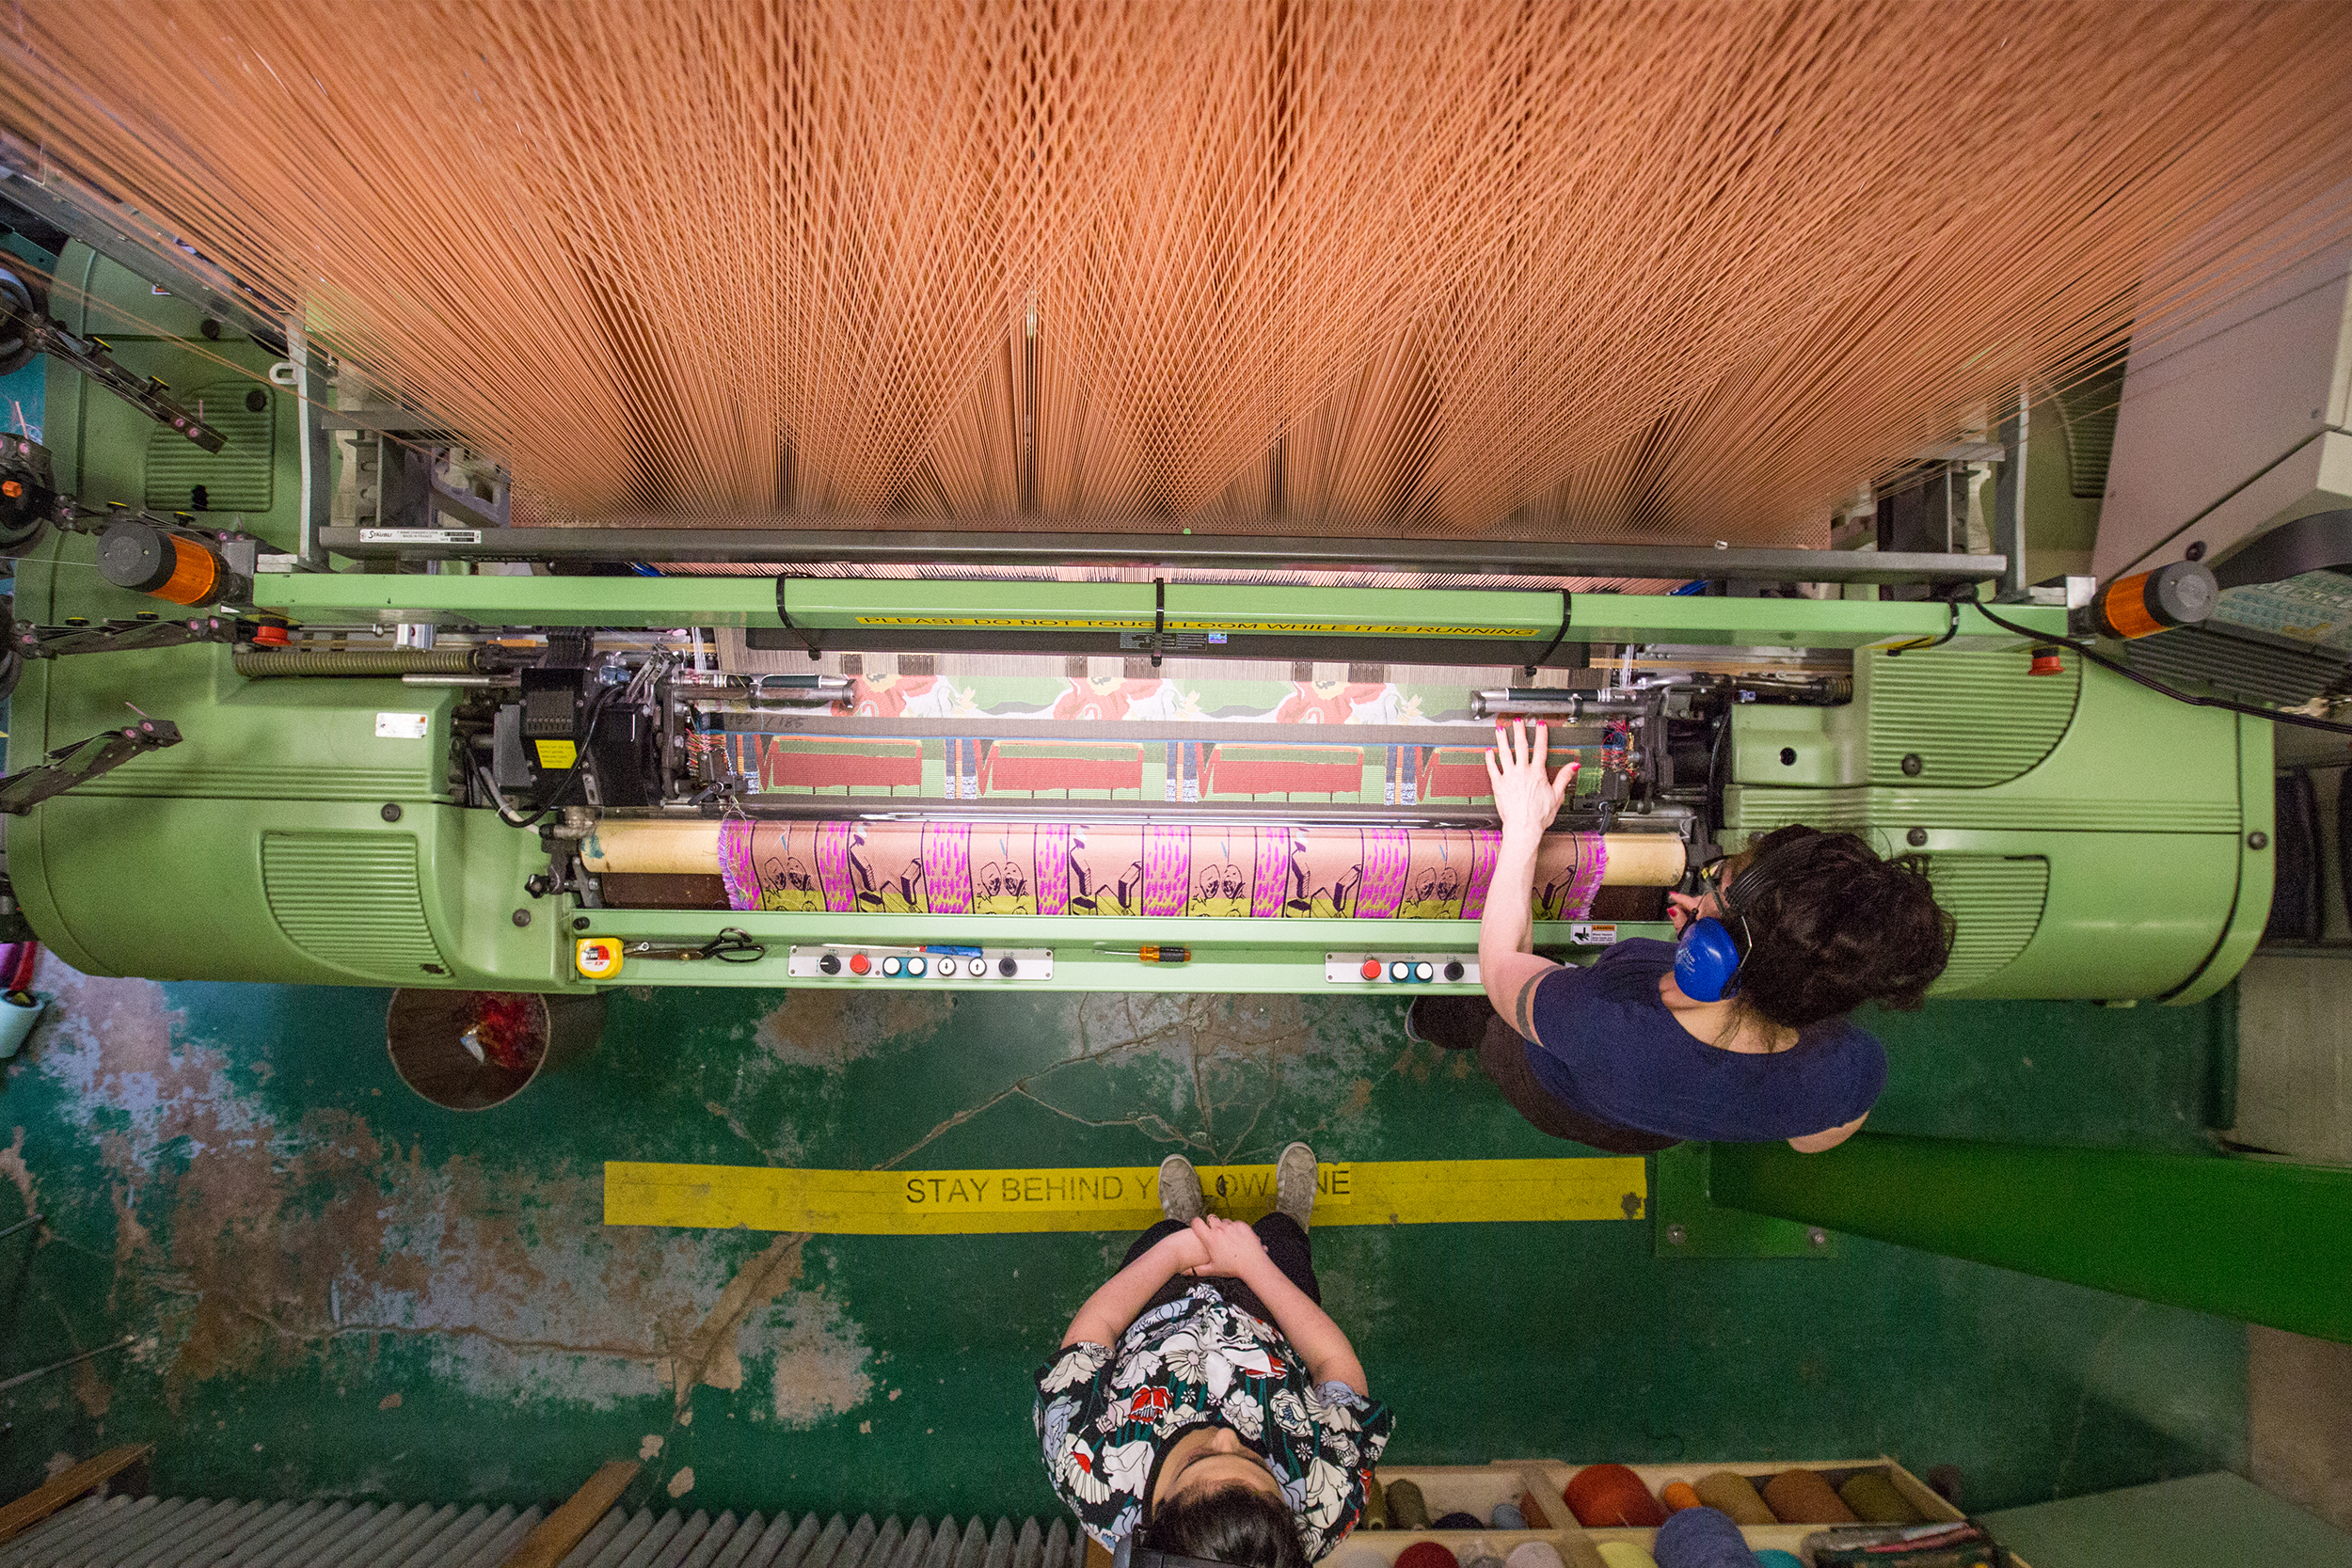 a view from above of the Jacquard loom